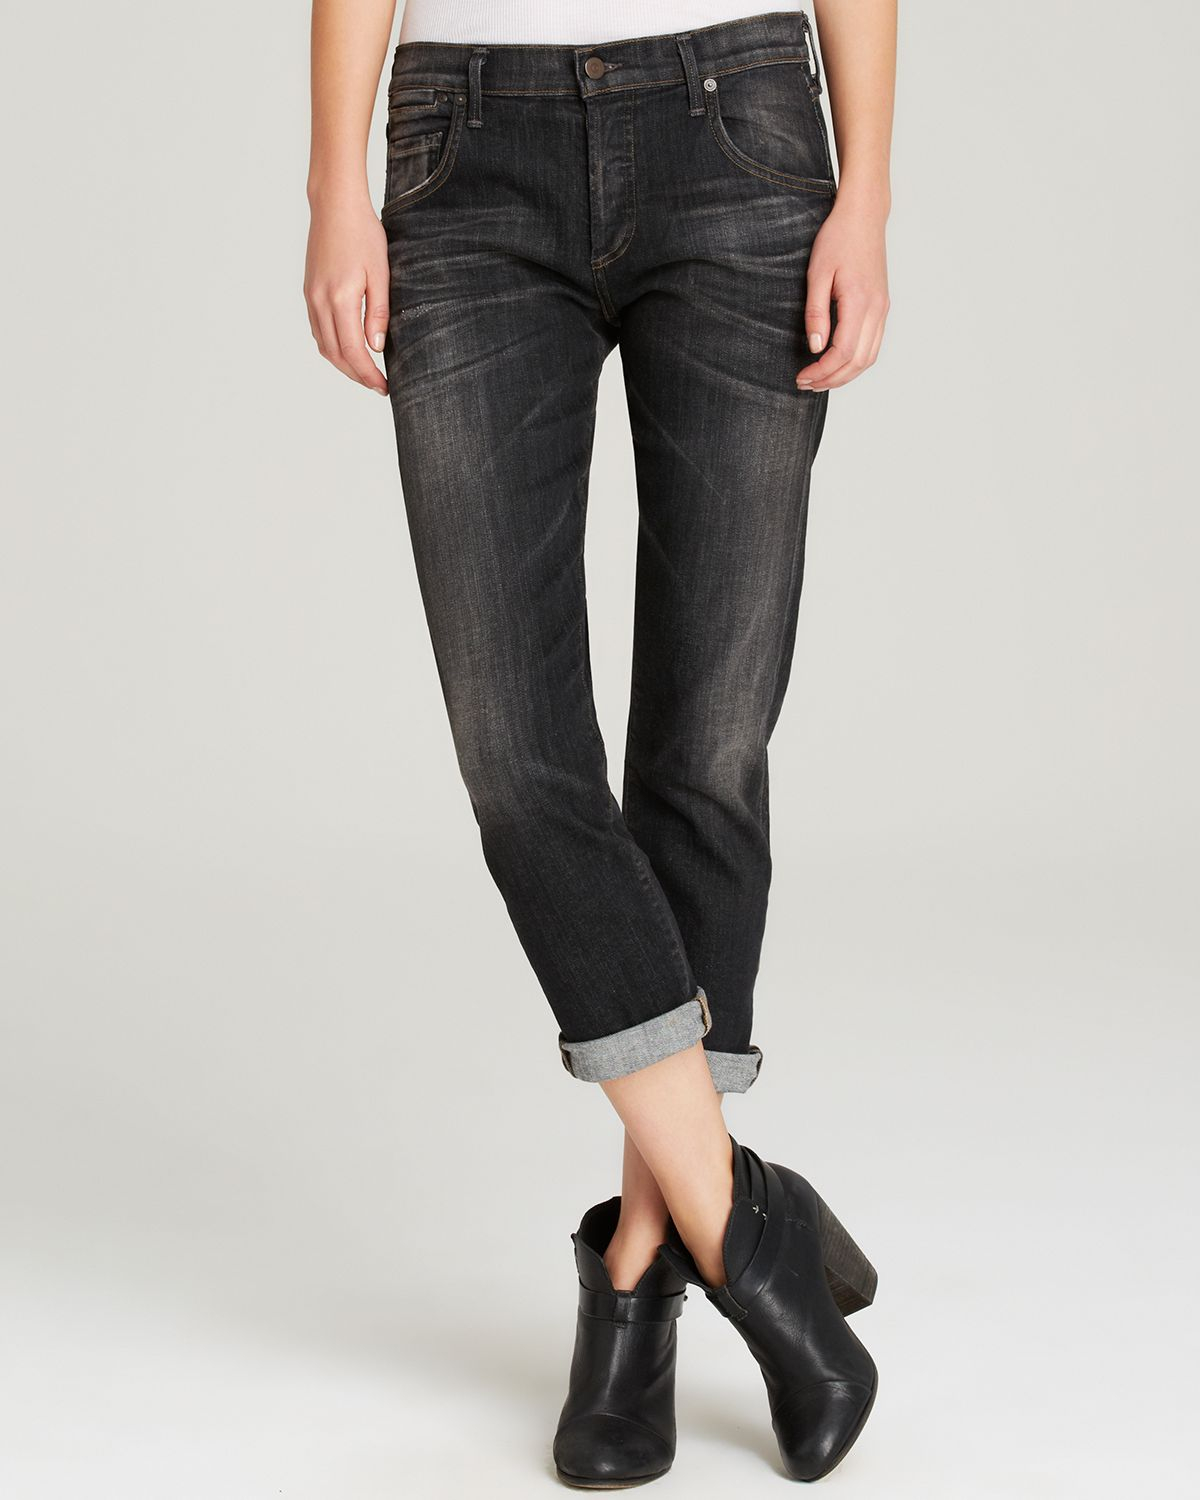 Citizens Of Humanity Jeans - Emerson Slim Fit Boyfriend Ankle In ...